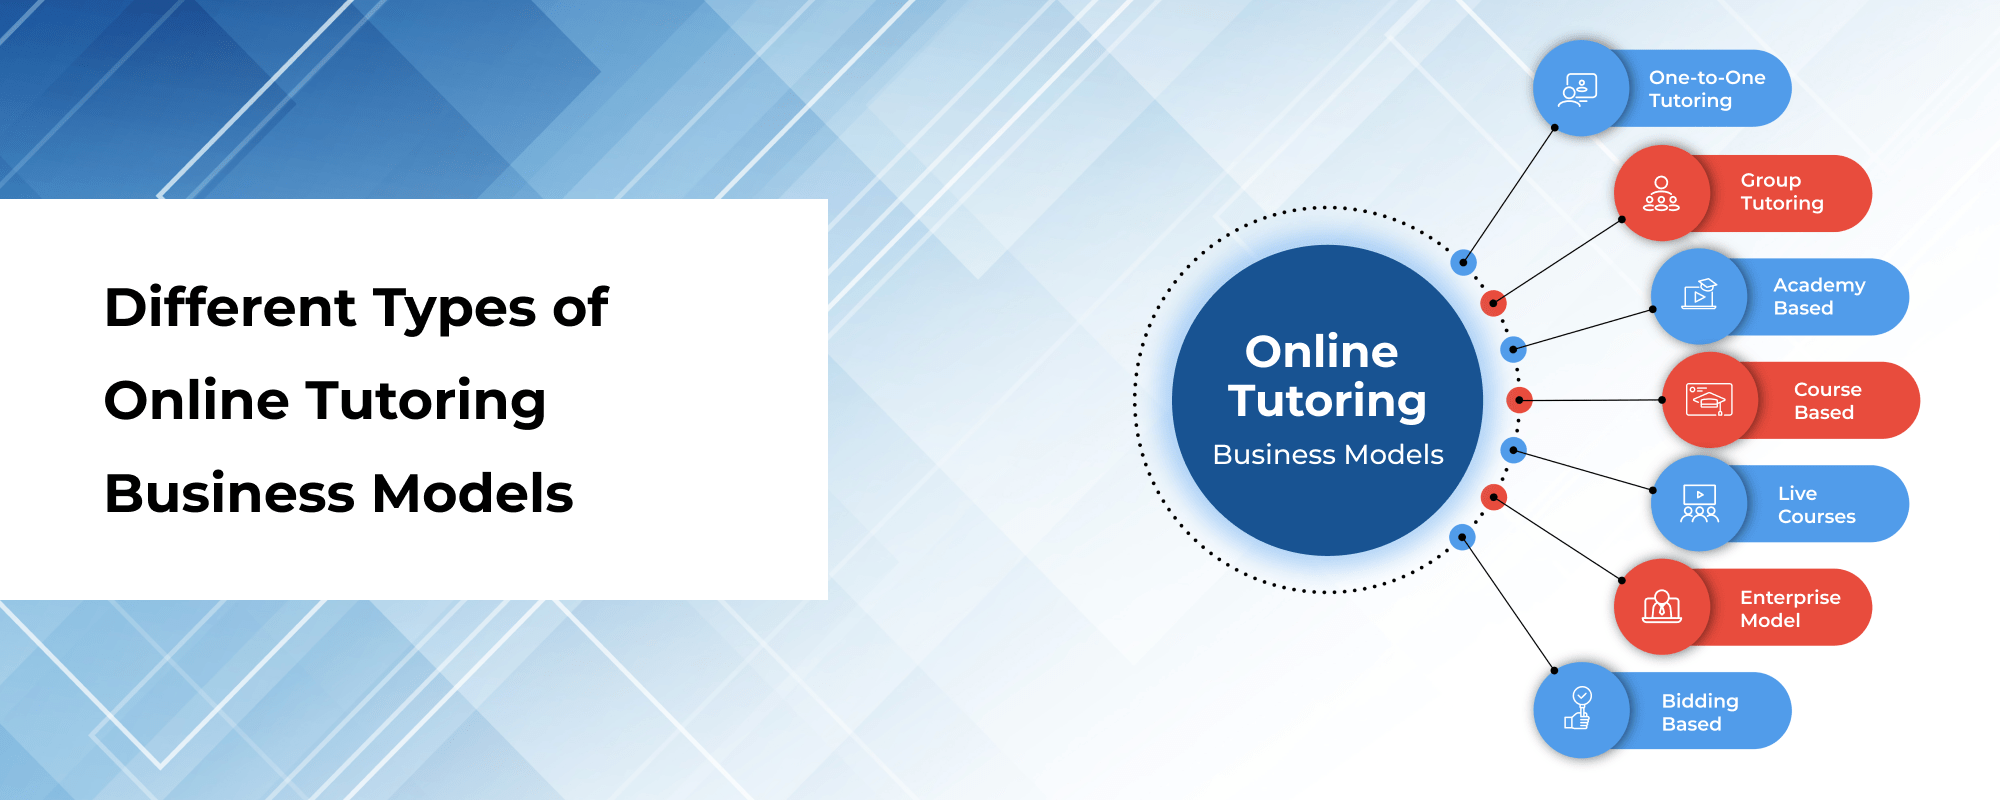 Different Types of Online Tutoring Business Models: Benefits And Challenges